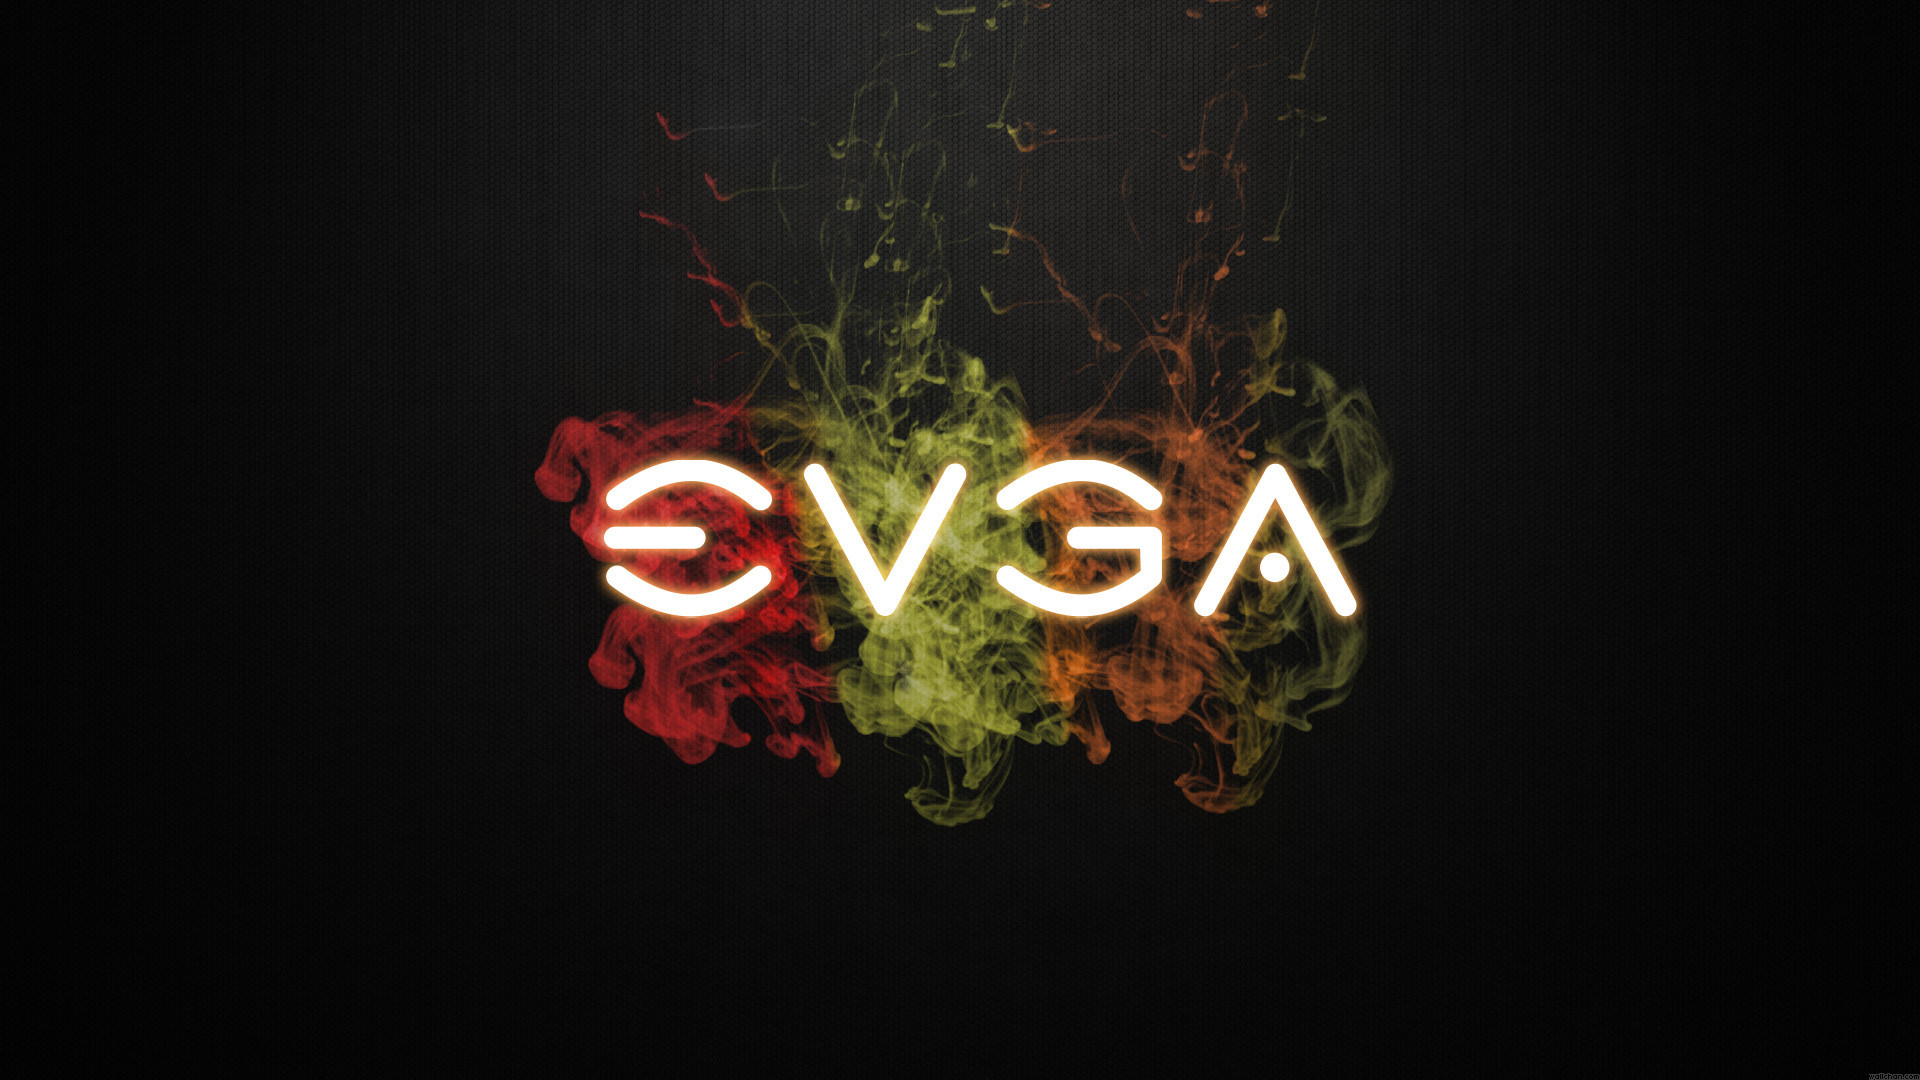 1920x1080 0  Red EVGA Wallpaper  Tech Backgrounds, 421223 Evga  Wallpapers, by Kelsey Co